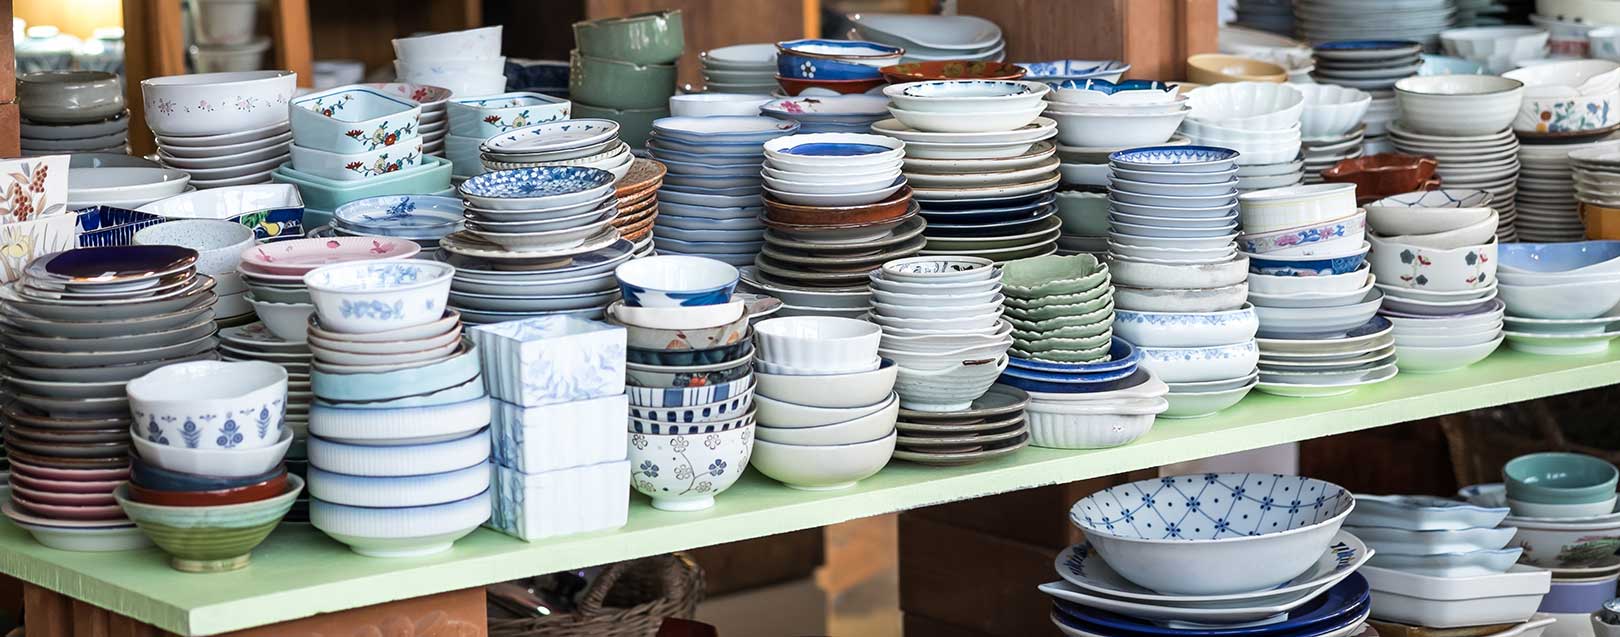 DGAD imposes ADD on Ceramic Tableware and Kitchenware imported from China